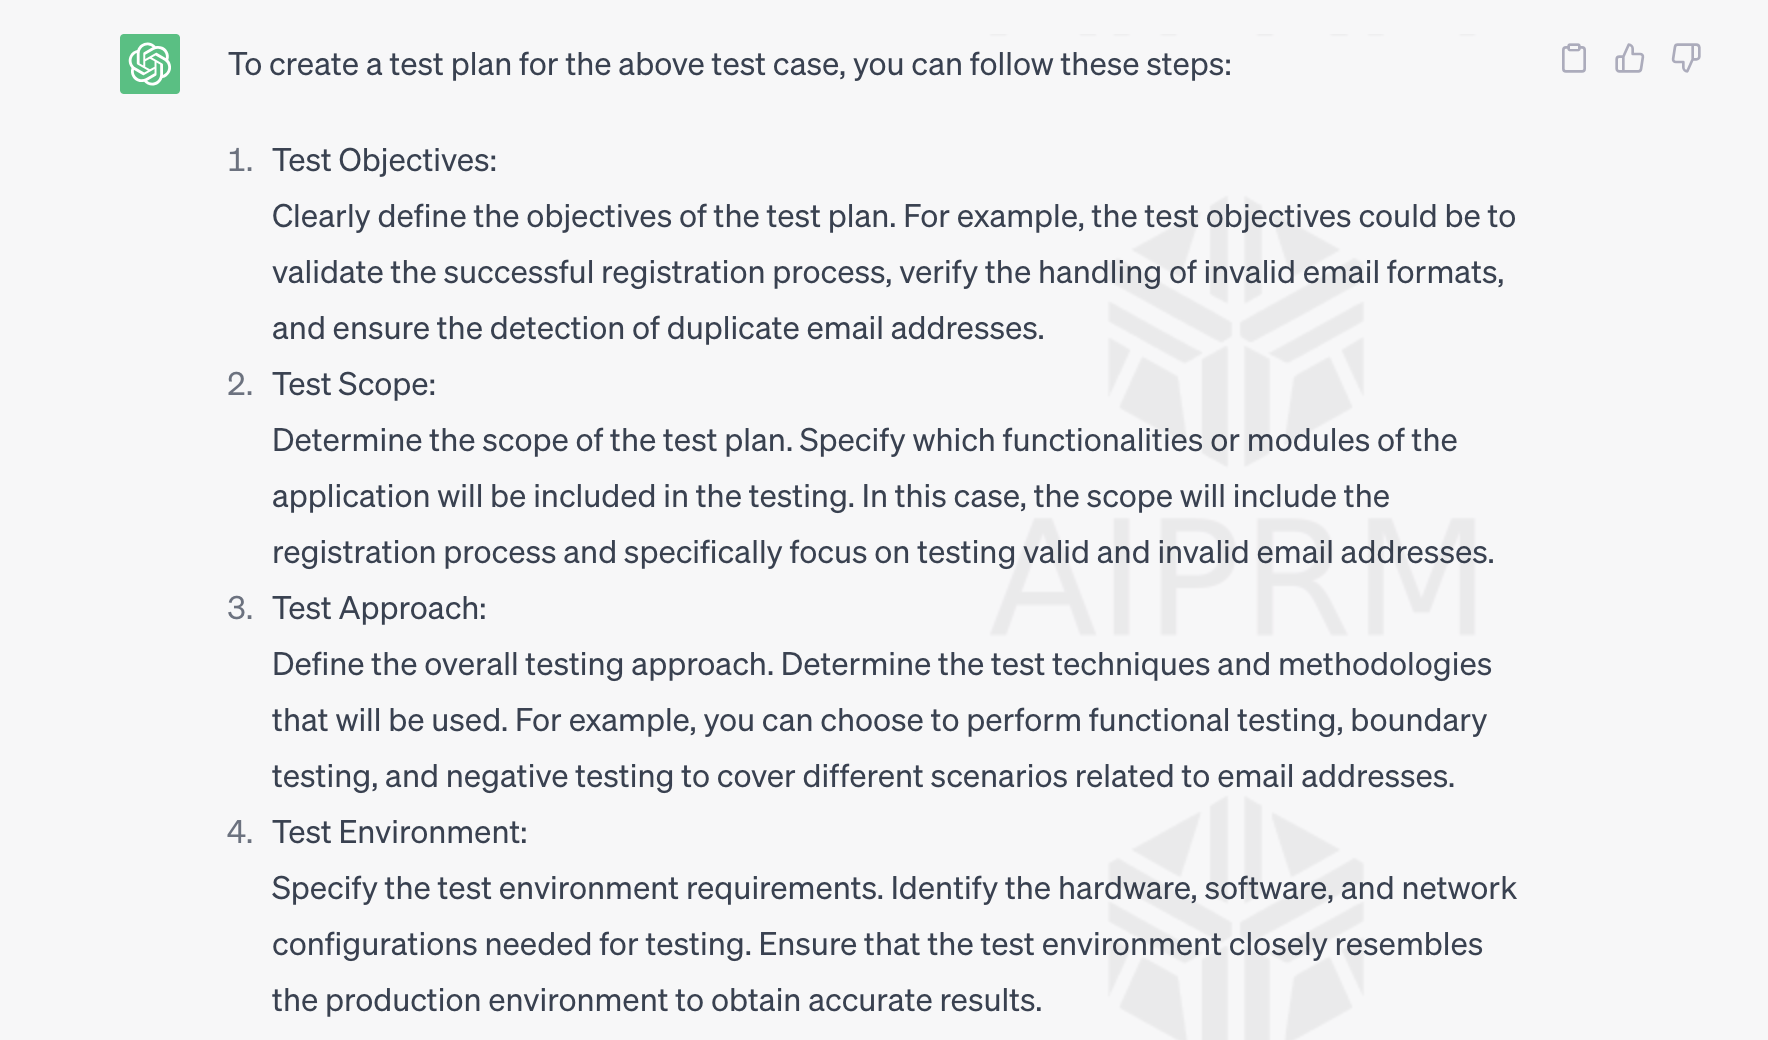 ChatGPT is creating test plans that are compliant with best practices: